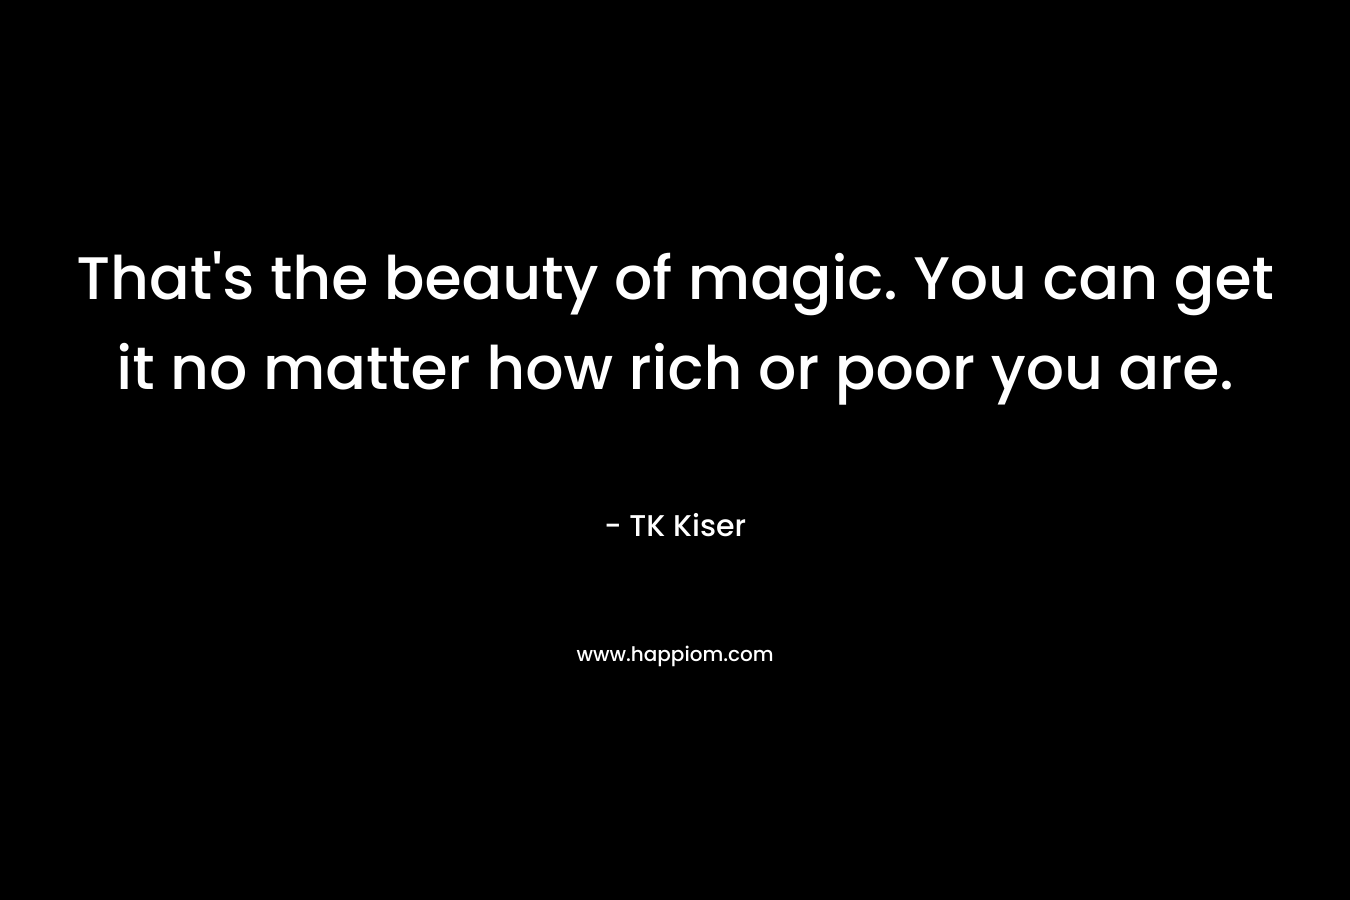 That's the beauty of magic. You can get it no matter how rich or poor you are.